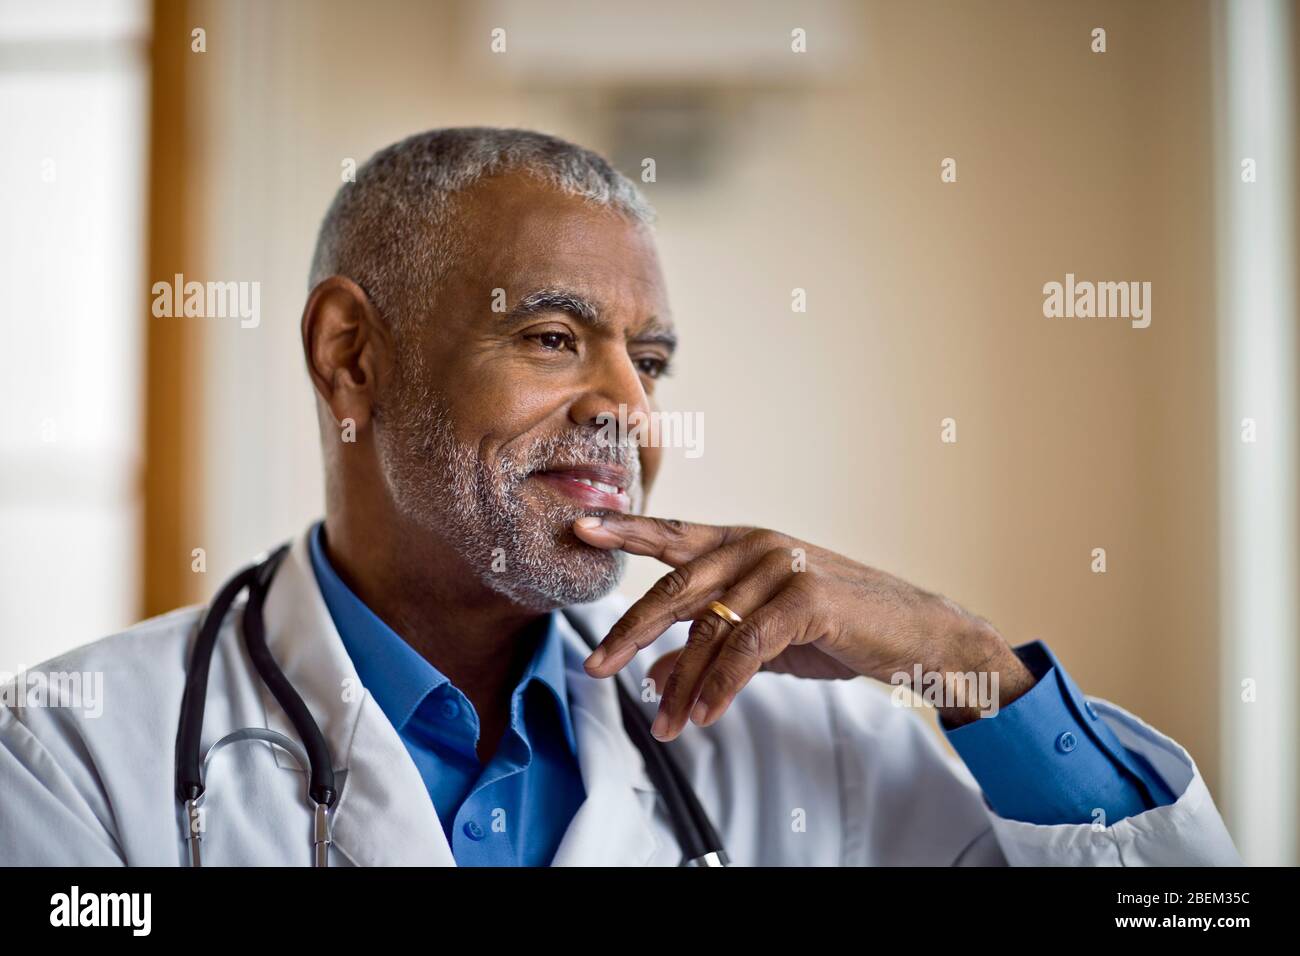 Portrait of a mature doctor Stock Photo